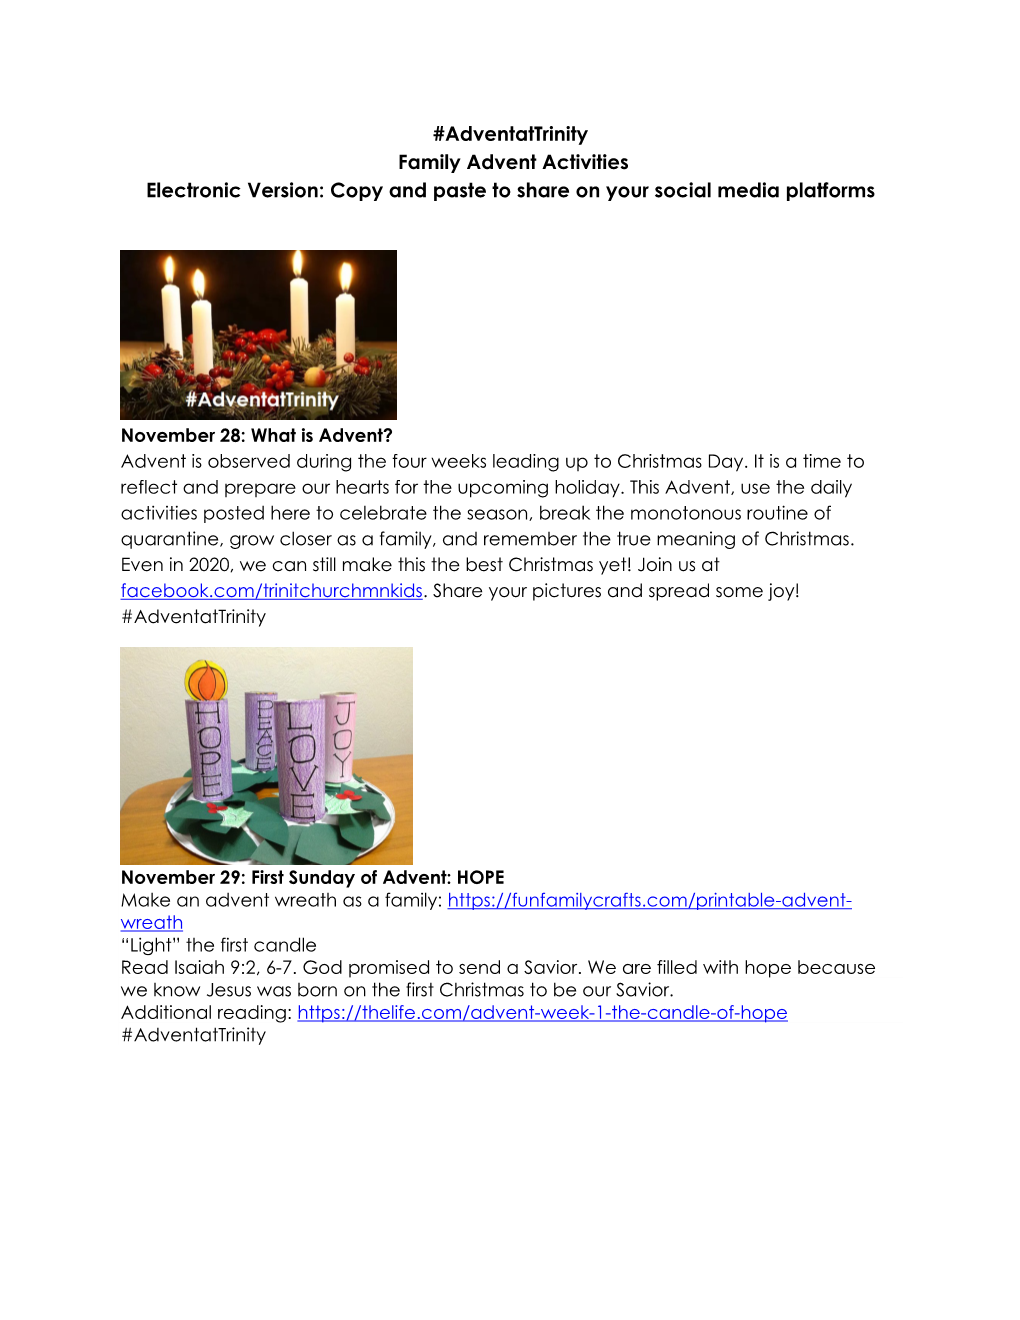 Adventattrinity Family Advent Activities Electronic Version: Copy and Paste to Share on Your Social Media Platforms